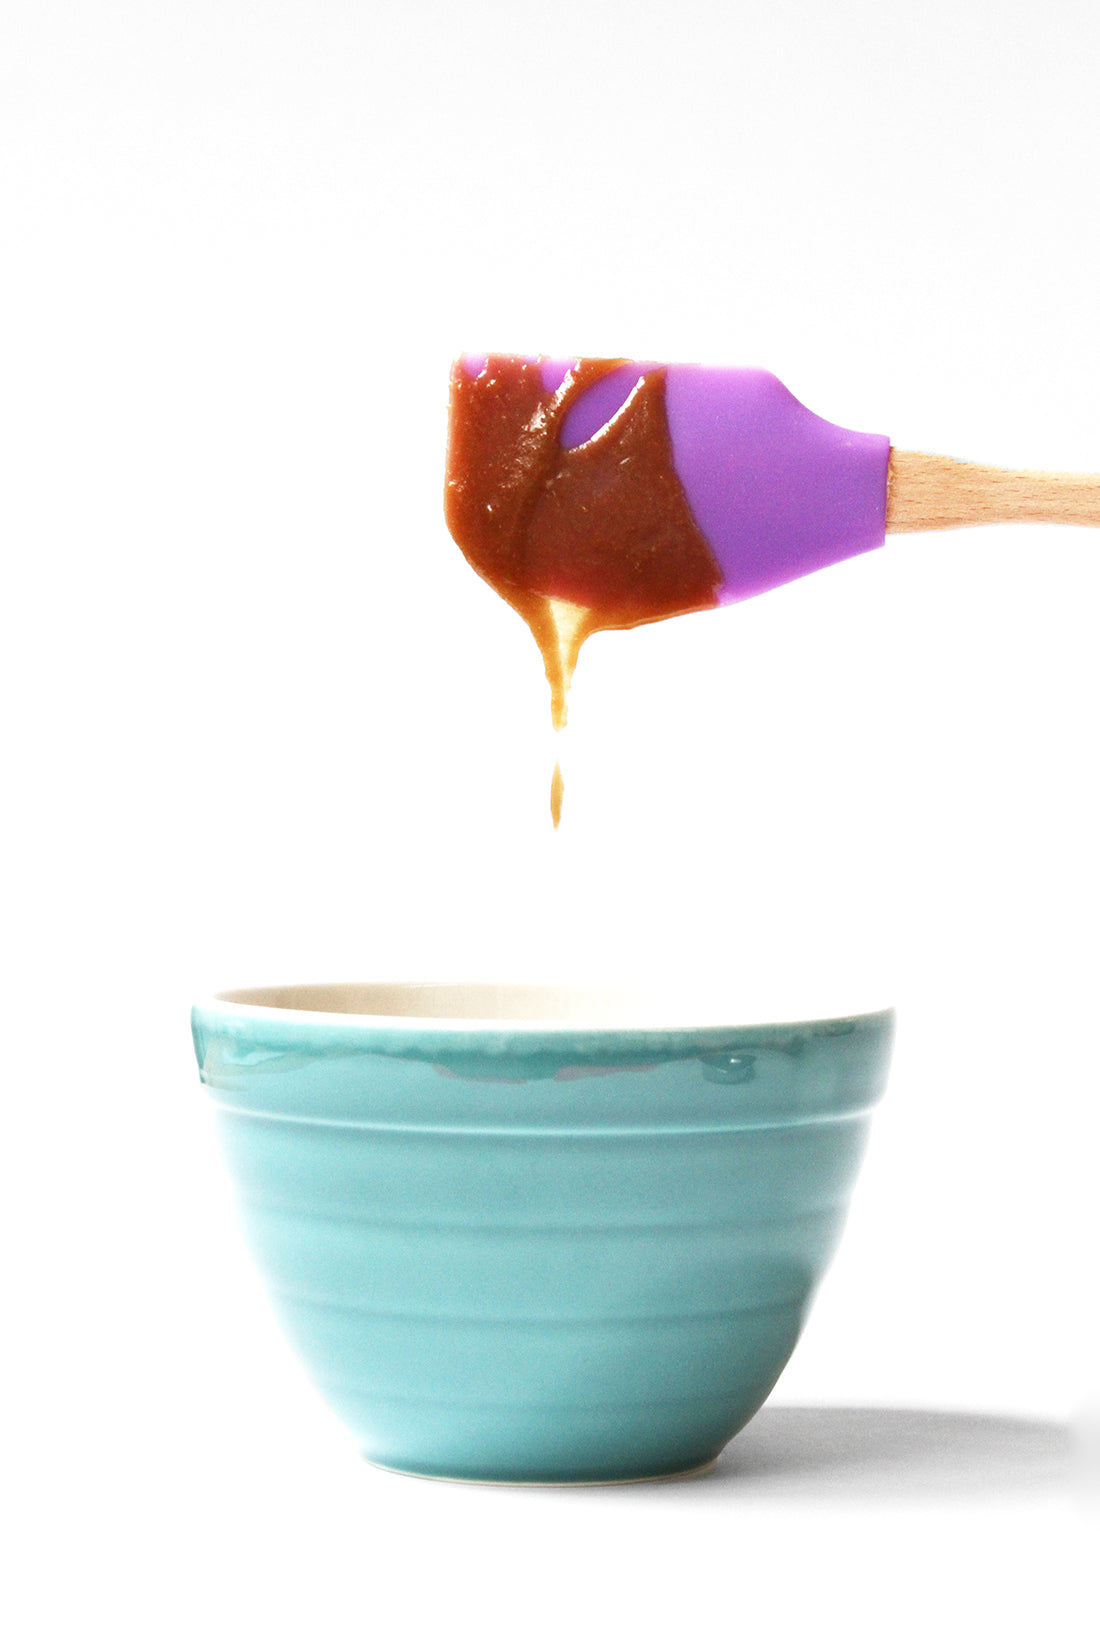 Image from the side of a purple spatula covered in toffee dripping into a blue mixing bowl for Miss Jones Baking Co Sticky Toffee Cakes